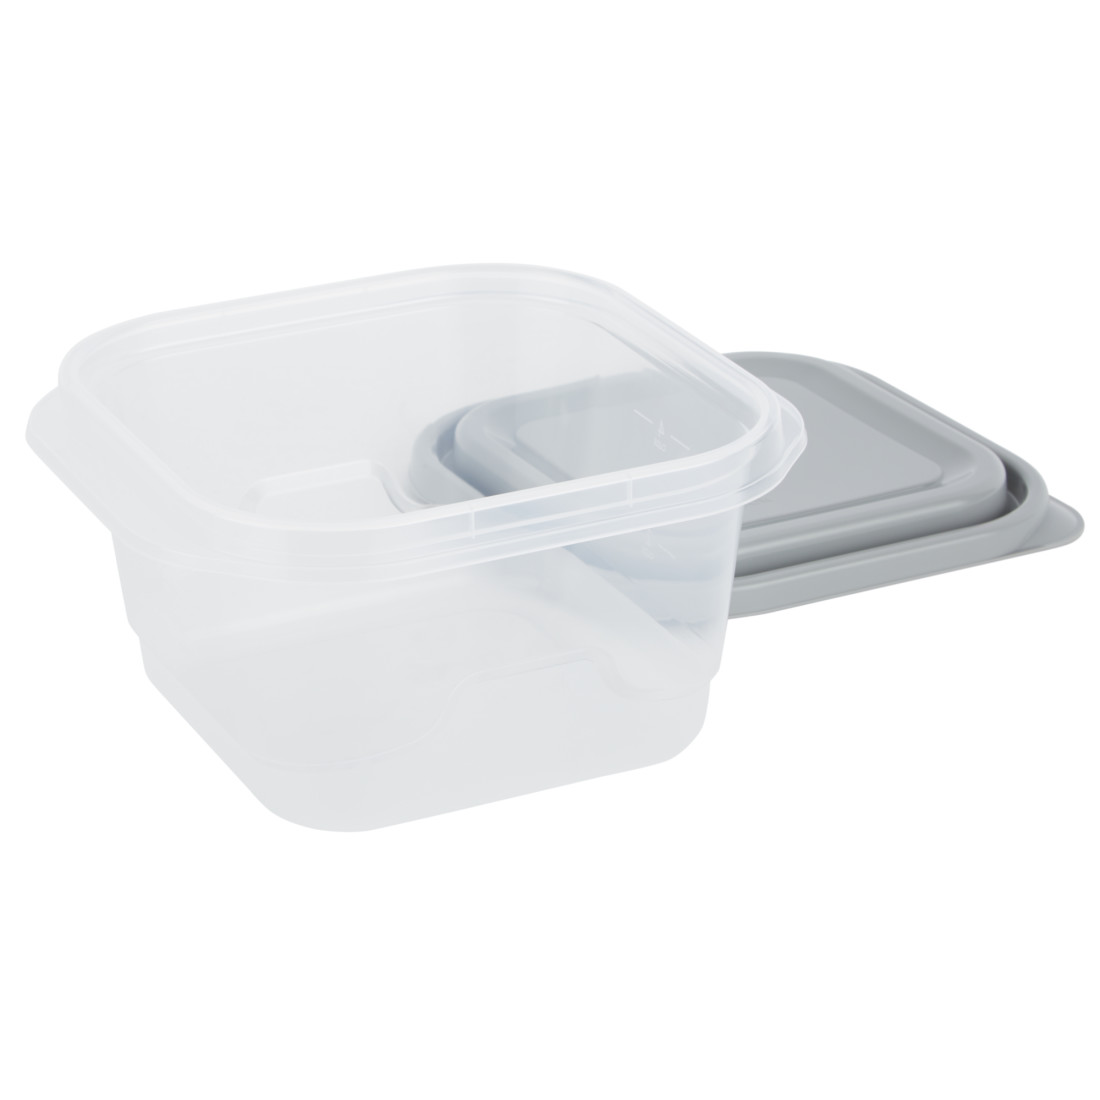 Square Food Containers Box Set of 5 with Airtight Snap On Lids by